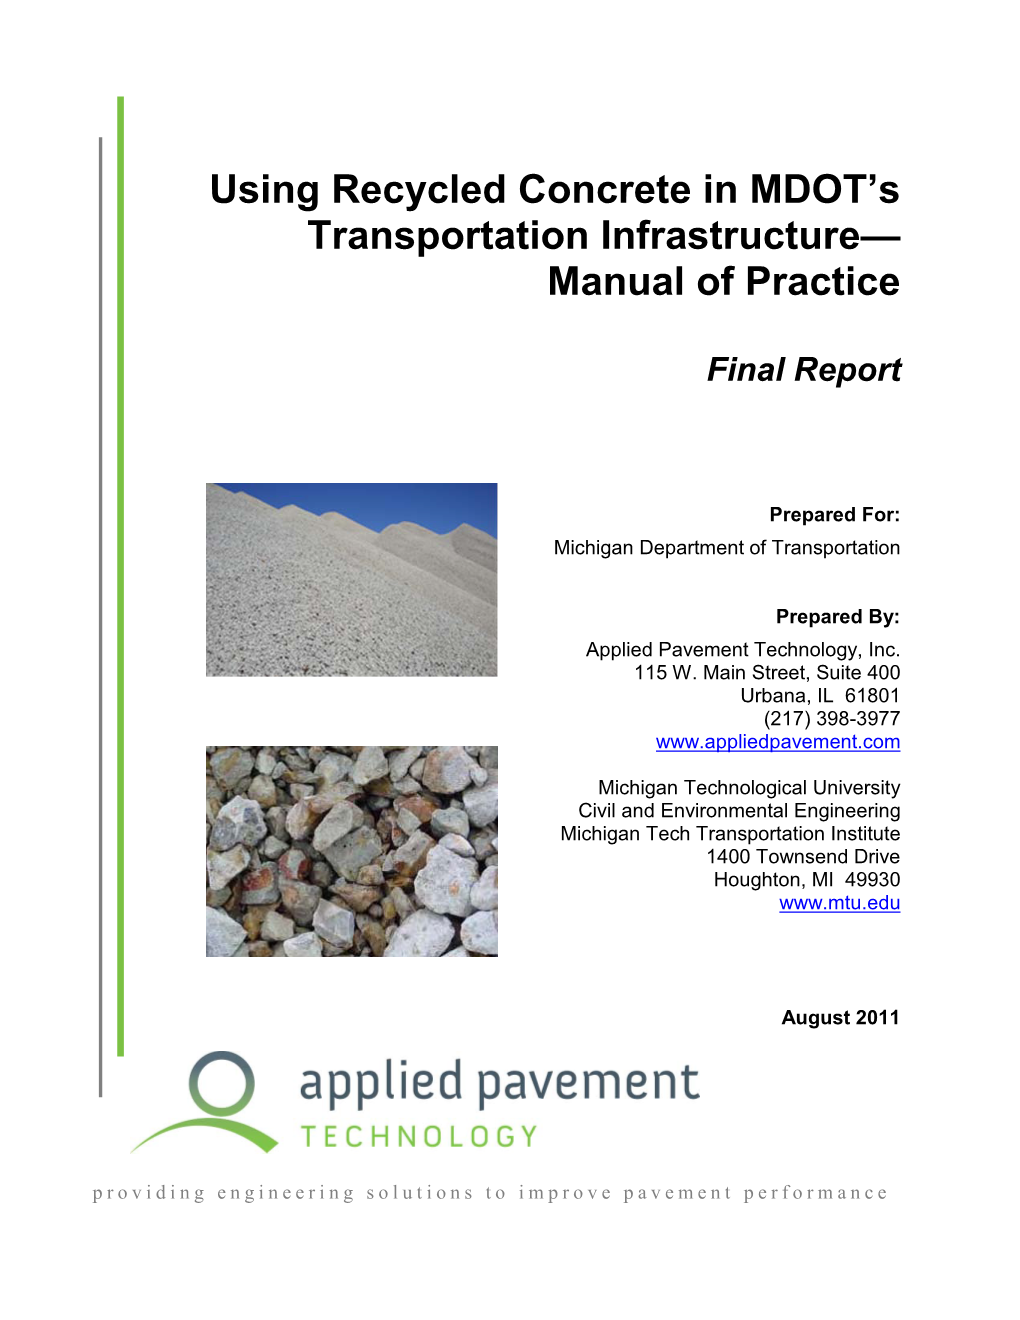 Using Recycled Concrete in MDOT's Transportation Infrastructure